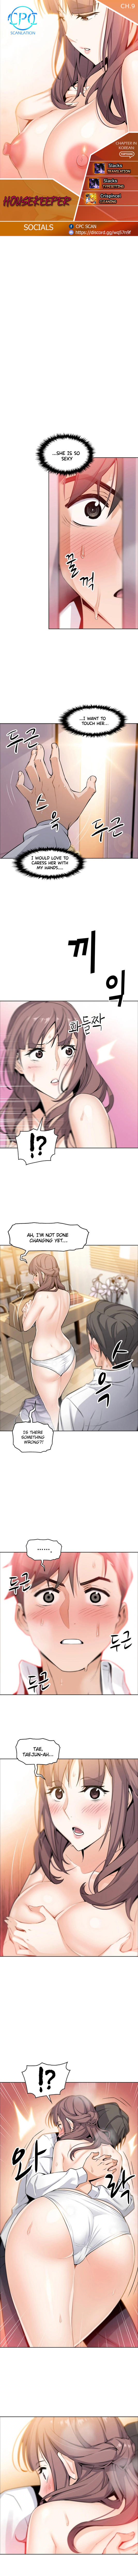 Housekeeper Manhwa - Chapter 9 Page 1